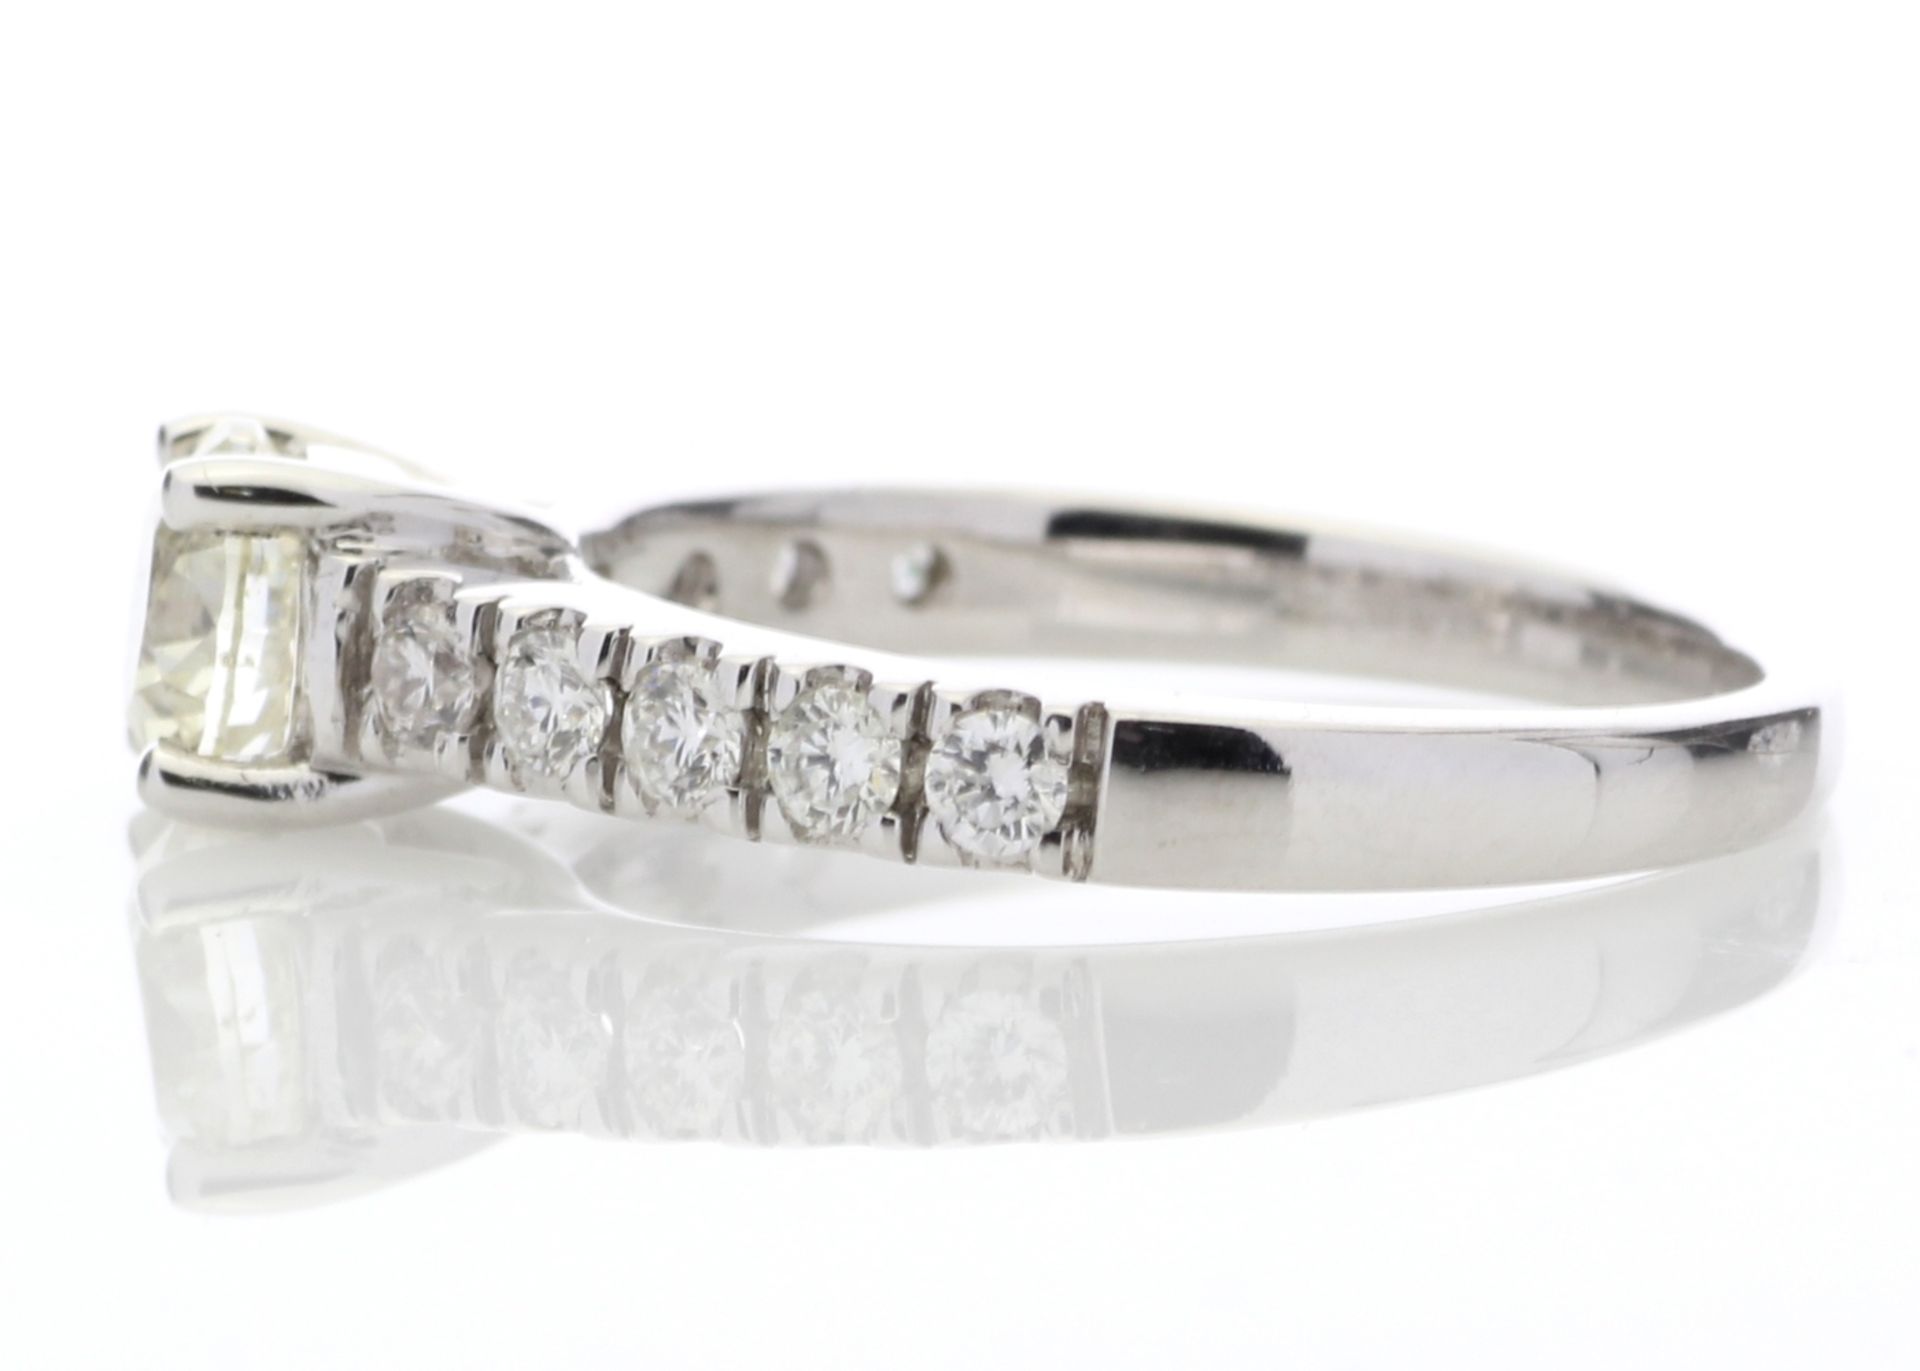 18ct White Gold Single Stone Claw Set With Stone Set Shoulders Diamond Ring 0.61 Carats - Valued - Image 3 of 4